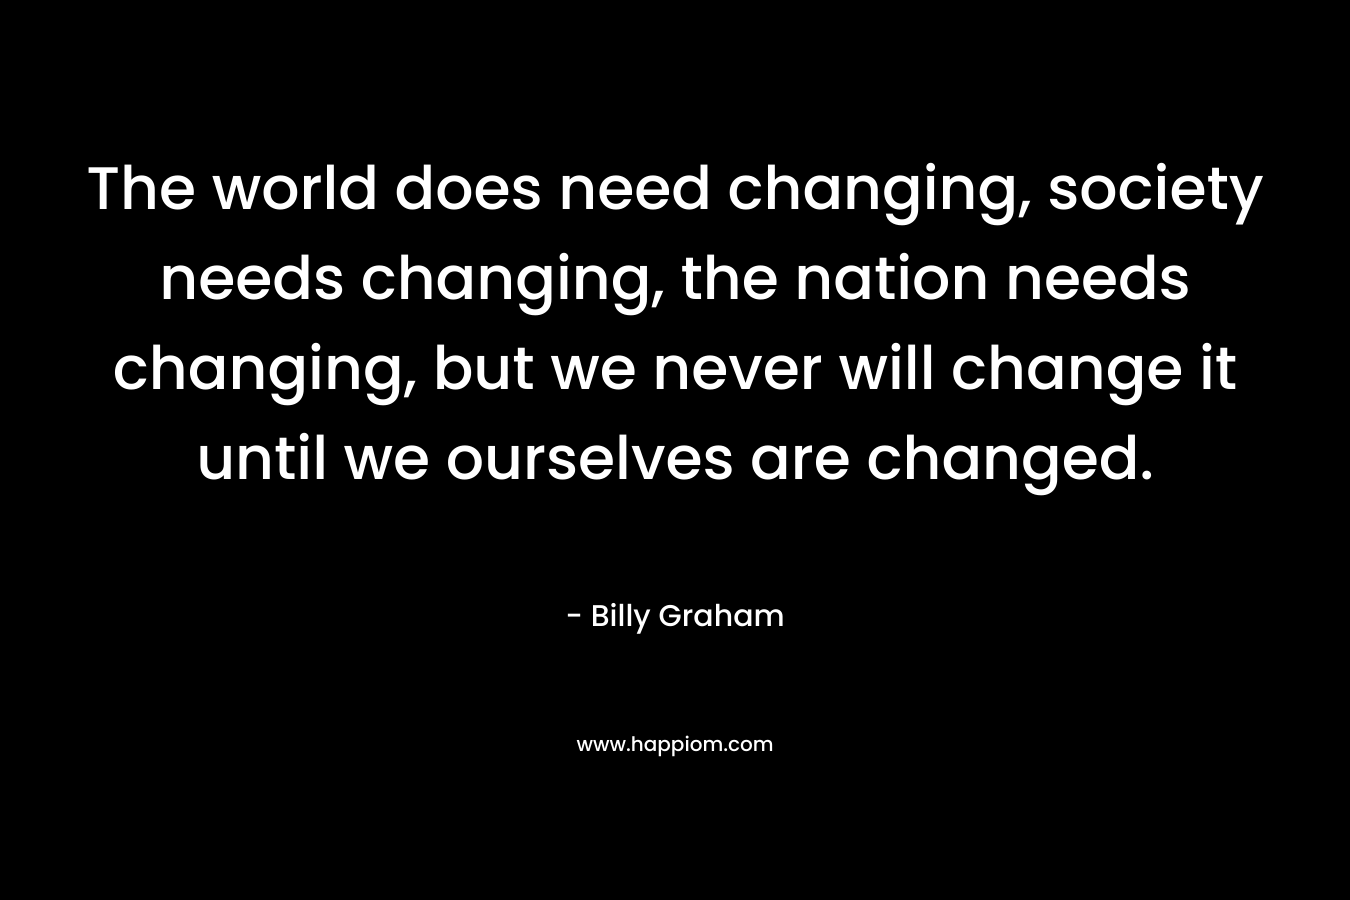 The world does need changing, society needs changing, the nation needs changing, but we never will change it until we ourselves are changed.